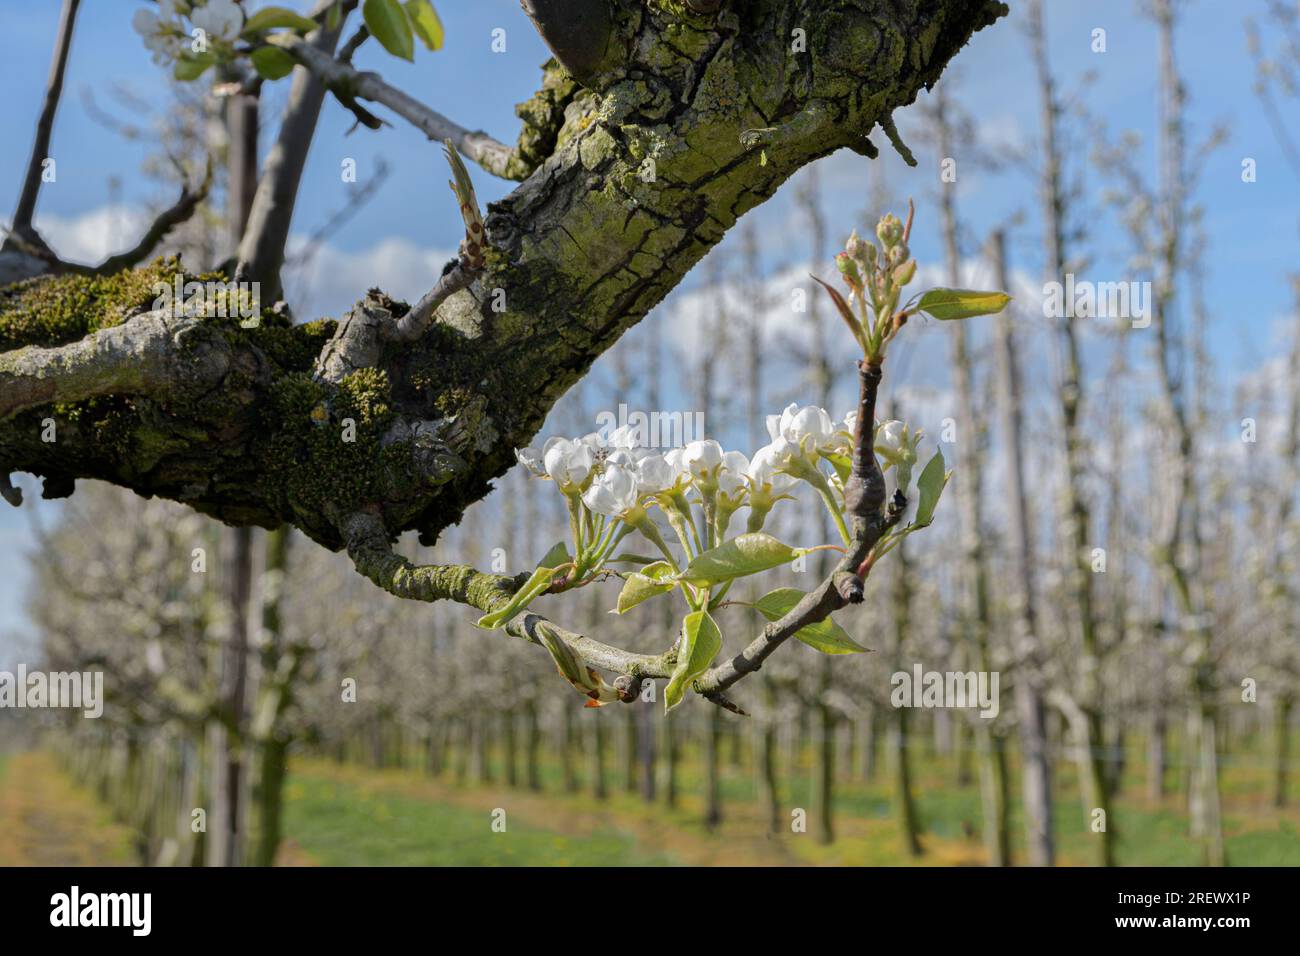 Pear tree branch with flowers. Spring beautiful landscape with pear trees. Stock Photo